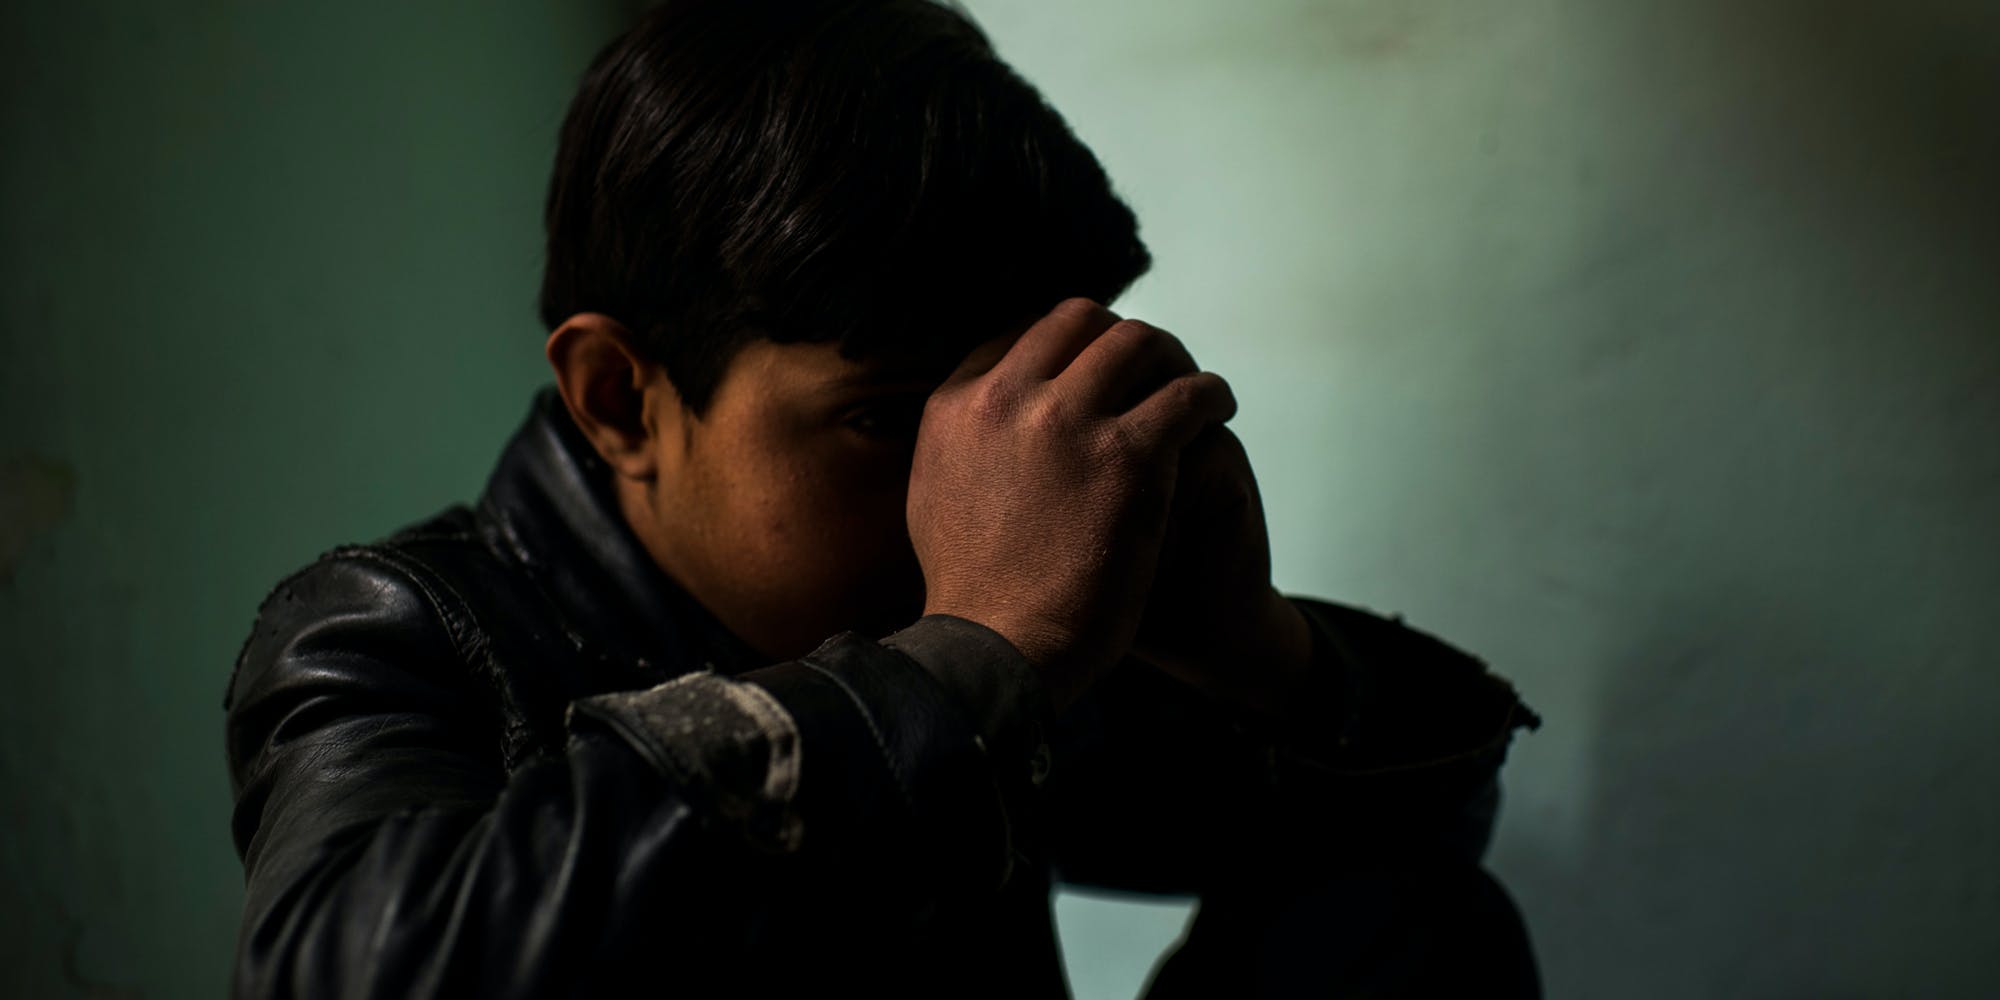 12-year-old Bilal survived a December 2018 night raid on his madrassa in Afghanistan’s Wardak Province, during which 12 other boys were massacred. “There were Americans in the corridor,” Bilal told The Intercept. “We could hear them speaking.” 